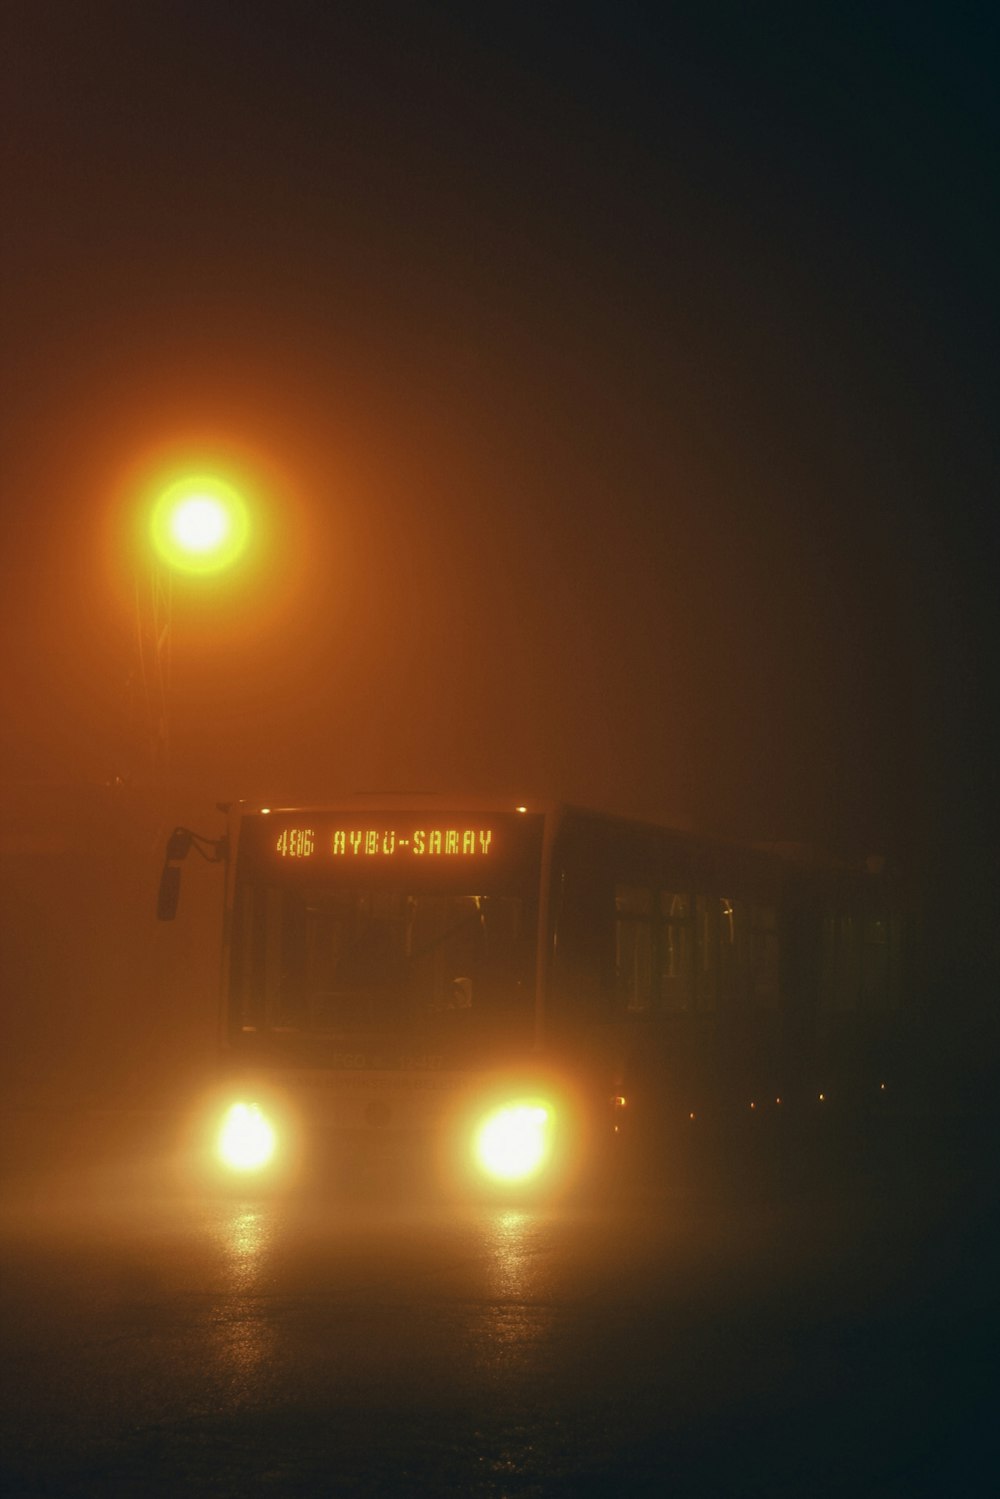 a bus driving down a foggy street at night